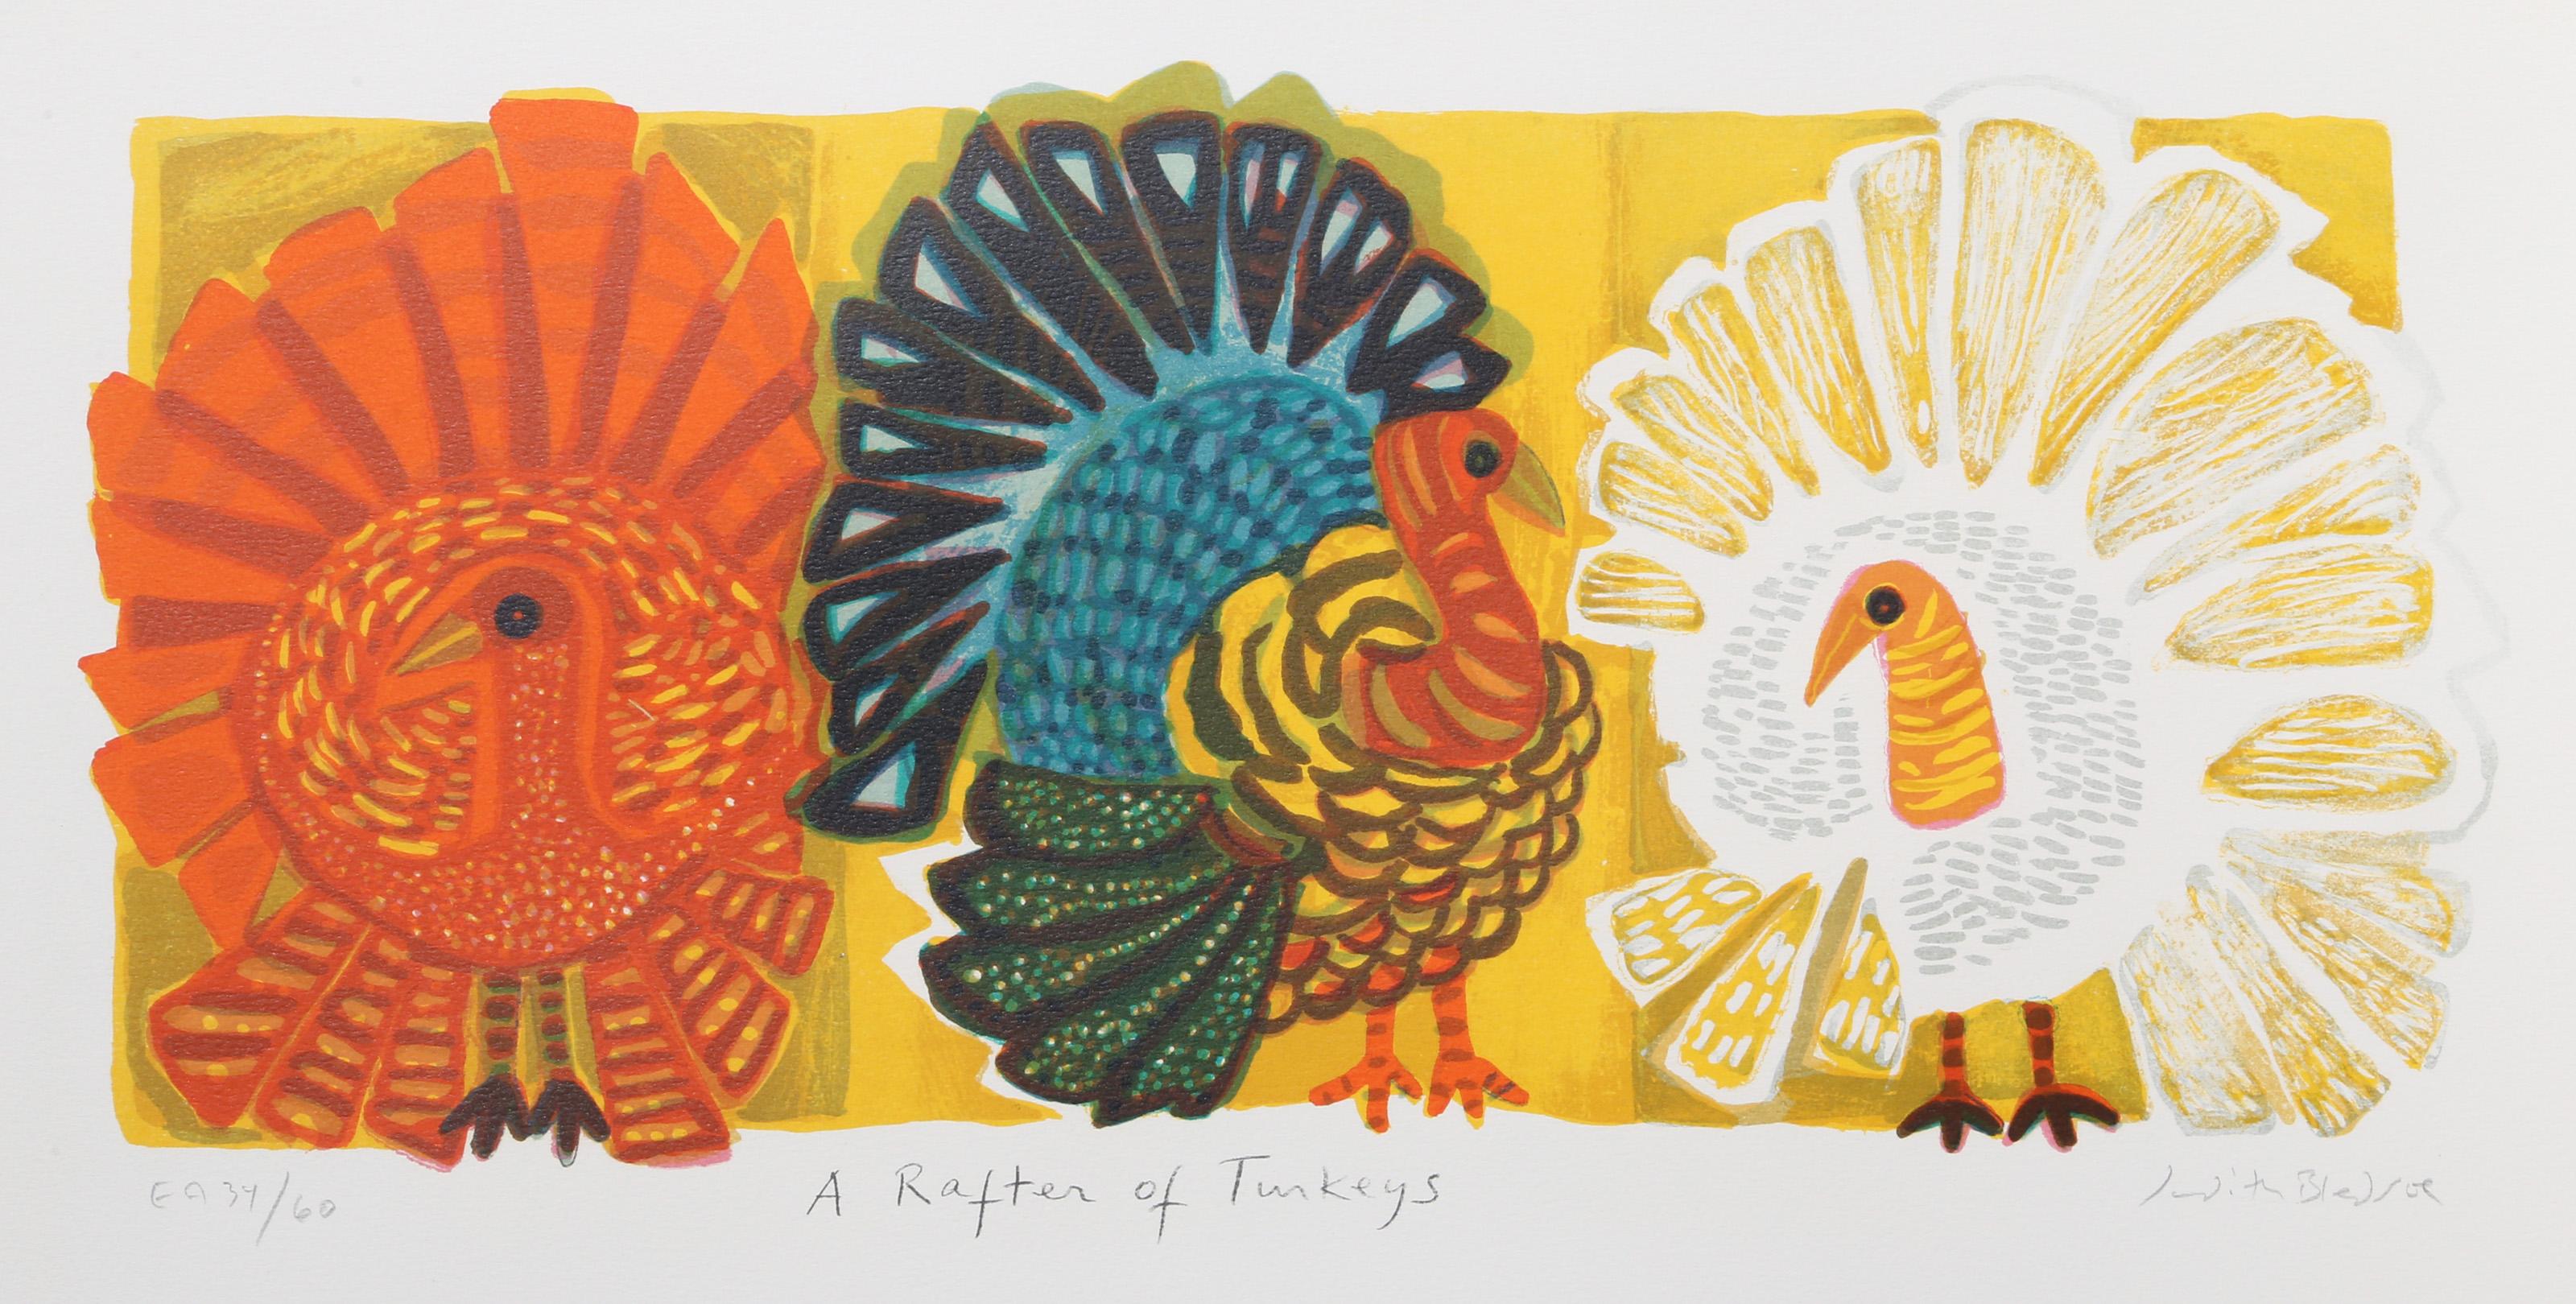 Judith Bledsoe, American (1938 - 2013) -  A Rafter of Turkeys. Year: circa 1974, Medium: Lithograph, signed and numbered in pencil, Edition: EA 34/60, Image Size: 8.5 x 13 inches, Size: 11.5  x 23 in. (29.21  x 58.42 cm), Description: Arranged